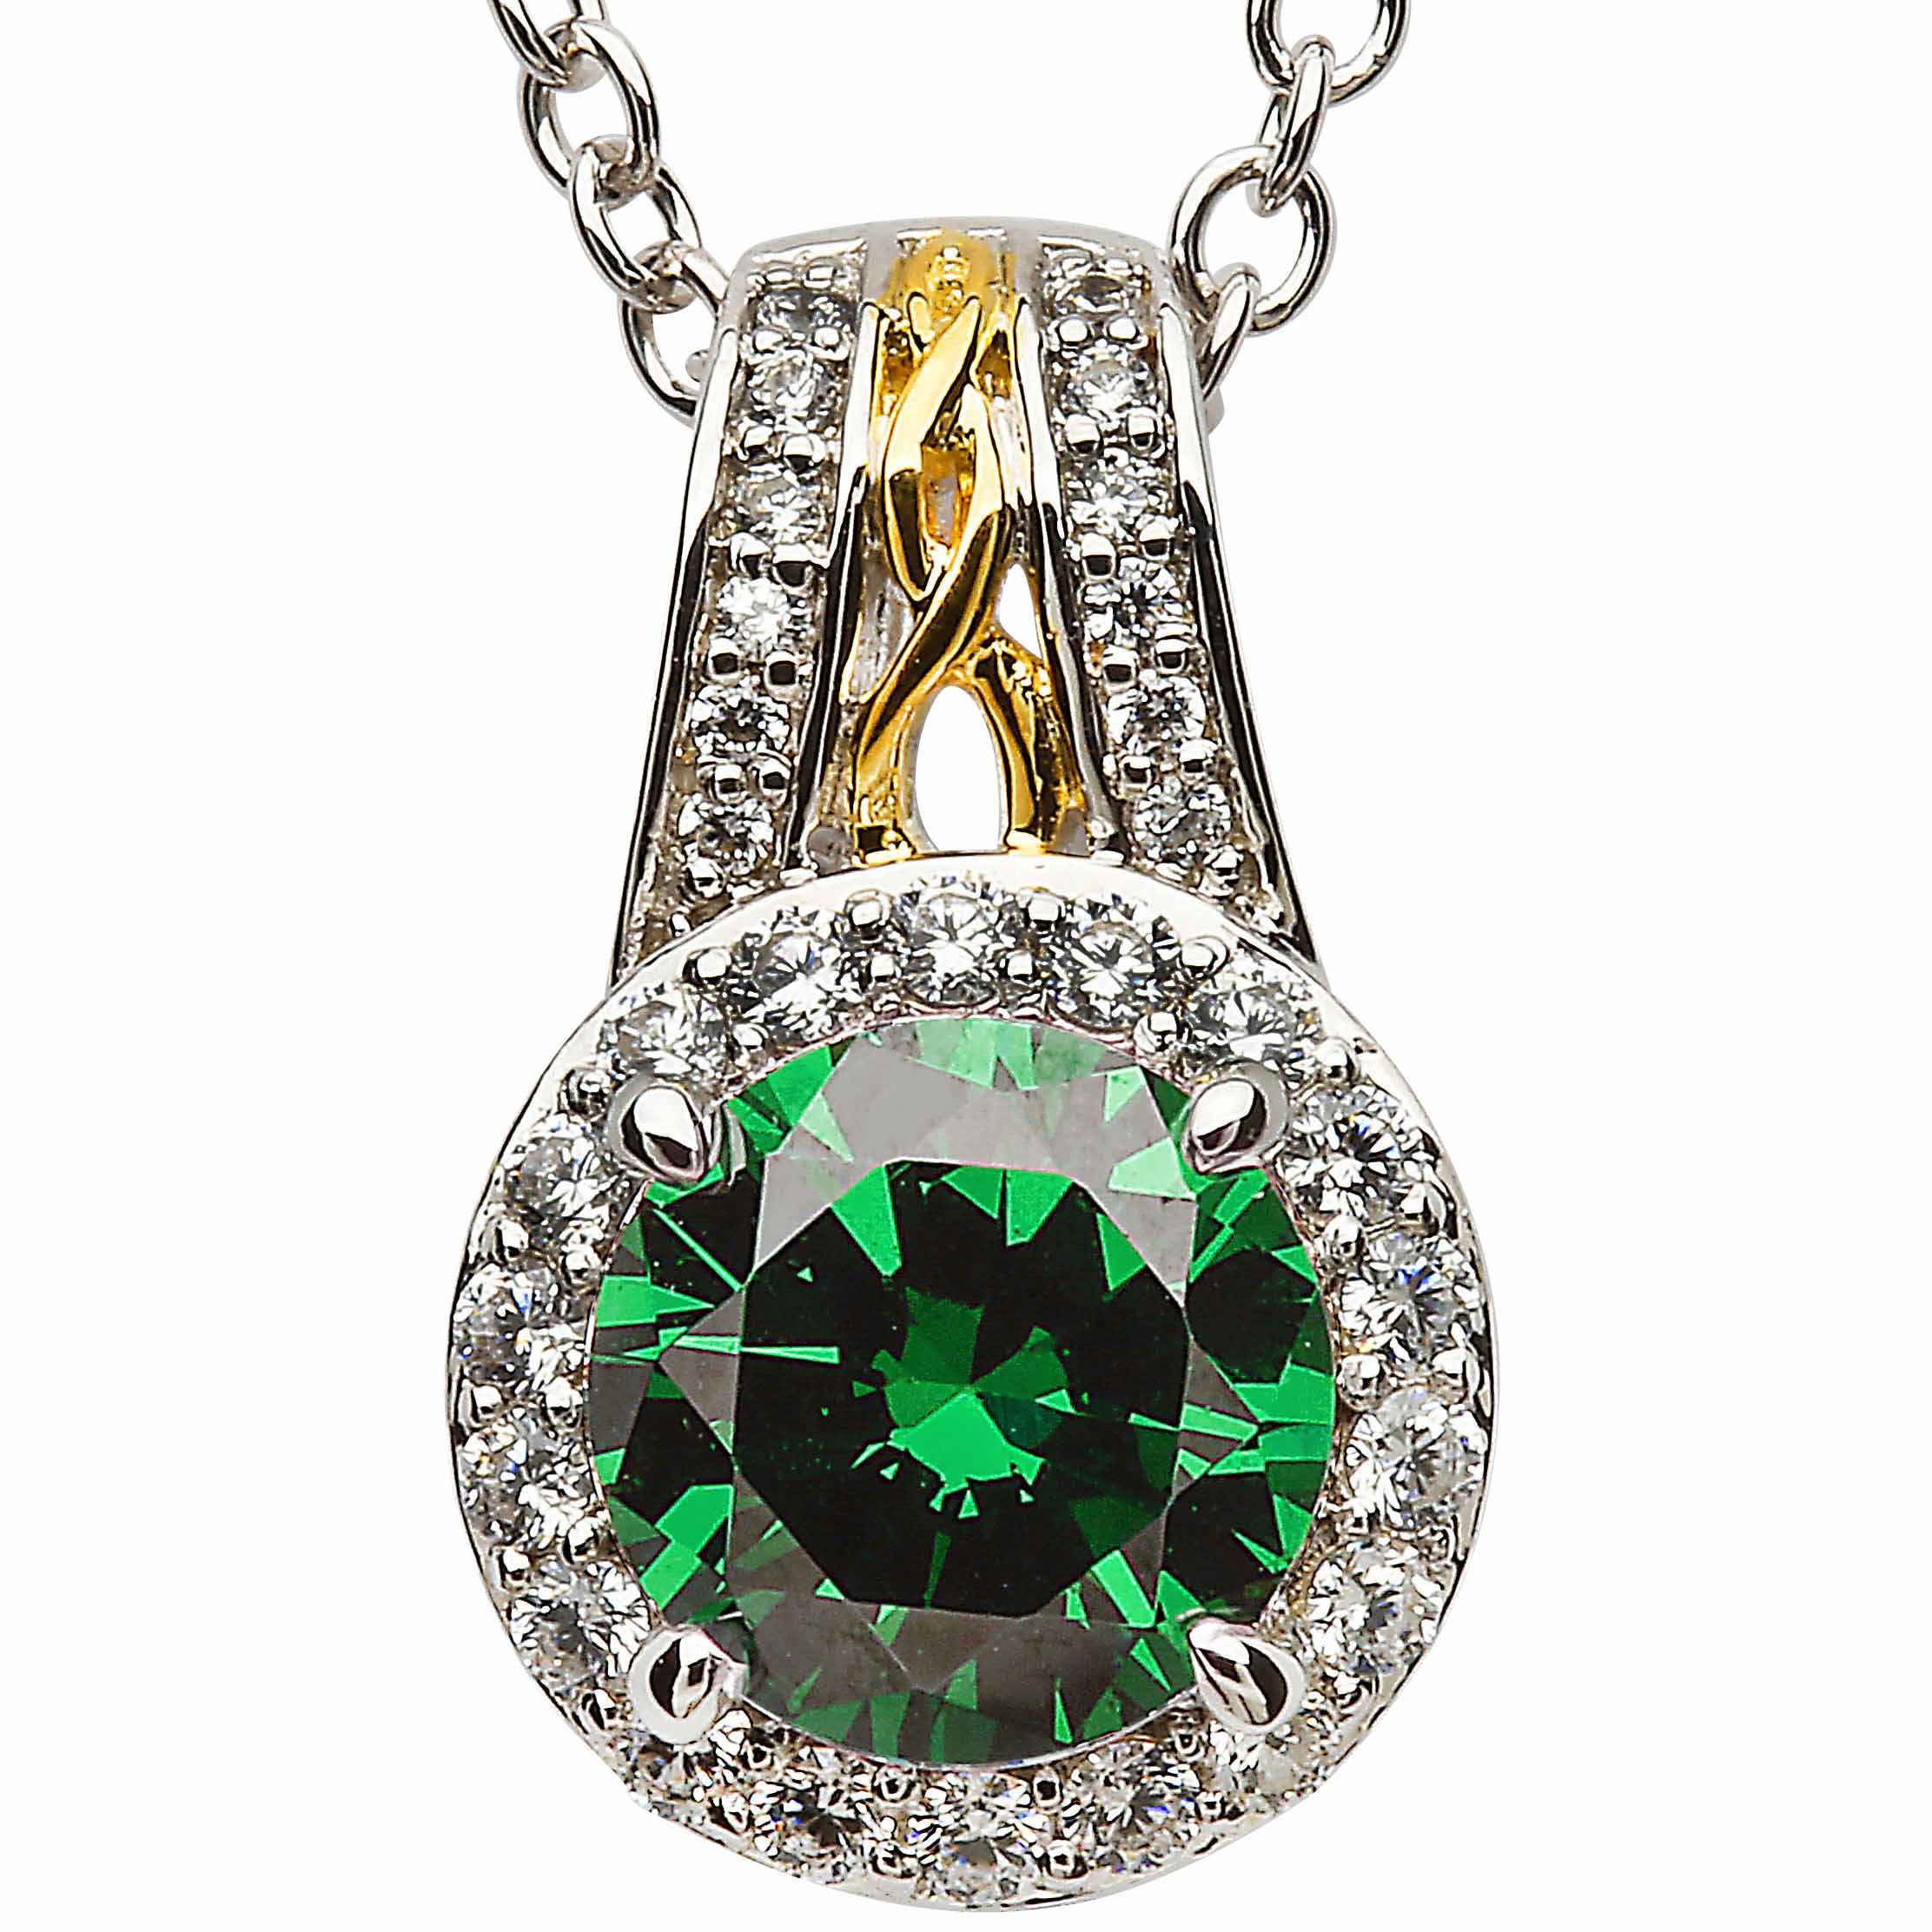 Product image for Irish Necklace - Sterling Silver Green CZ Halo Pendant